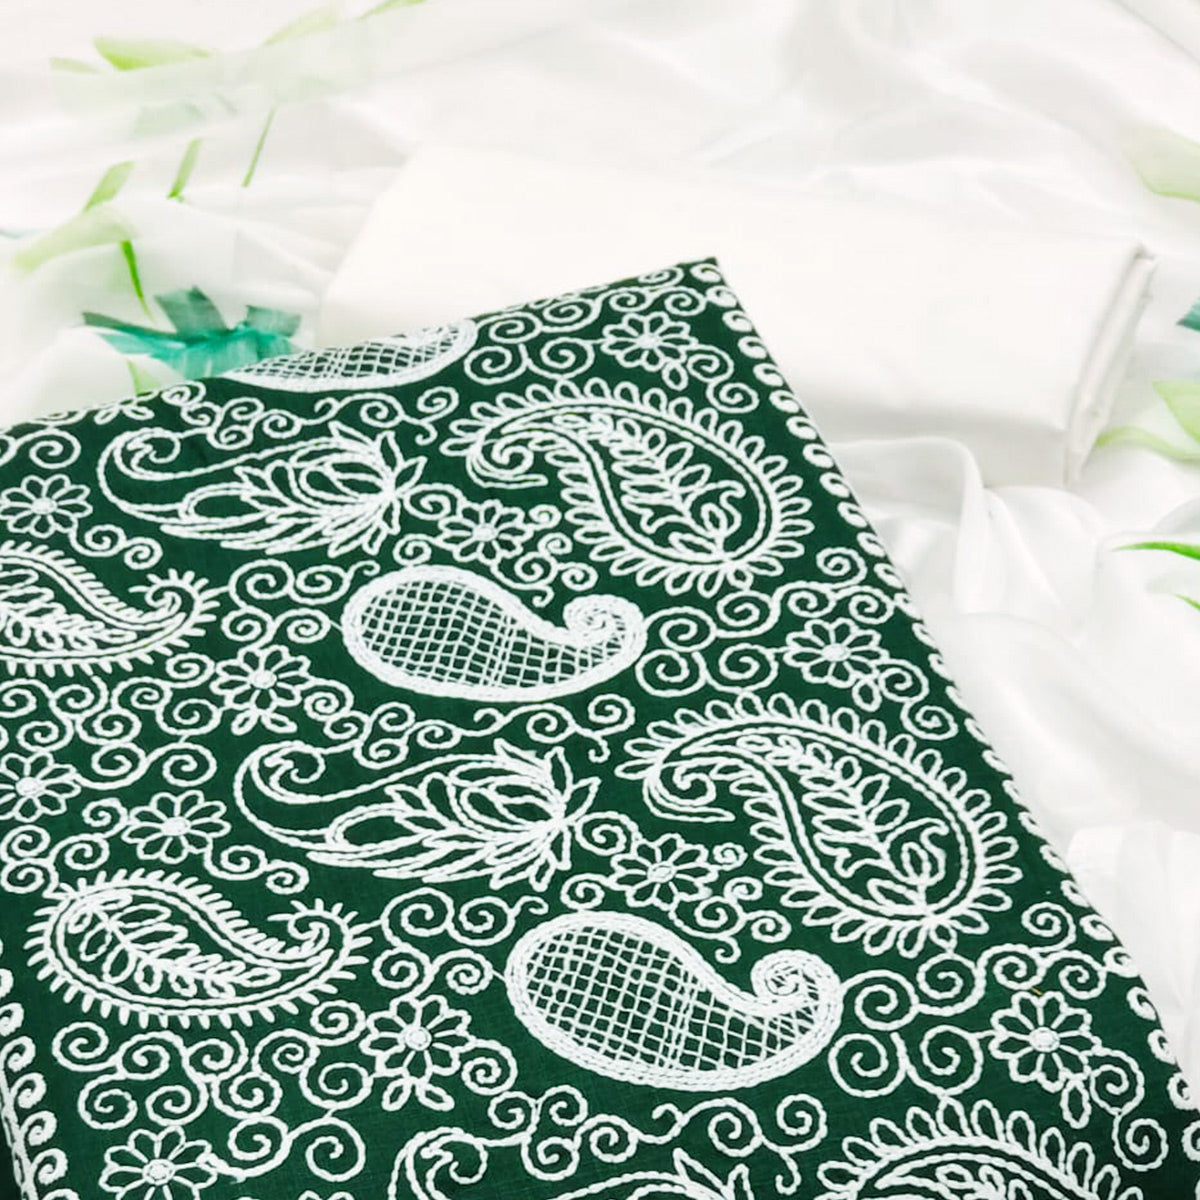 Green Embroidered Cotton Blend Dress Material